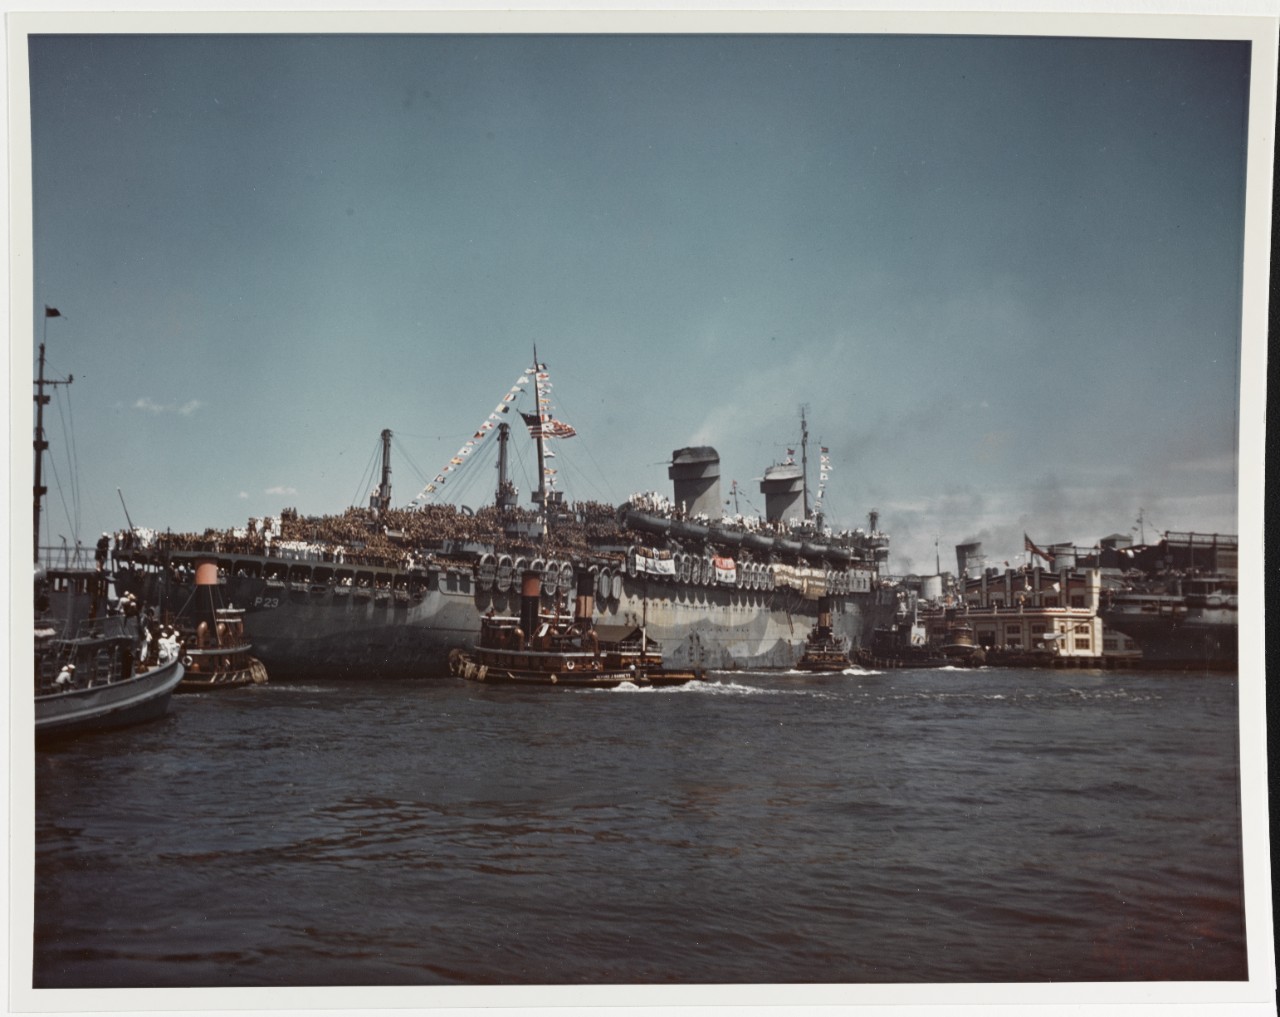 USS WEST POINT (AP-23) Arrives at New York City with returning troops, 11 July 1945